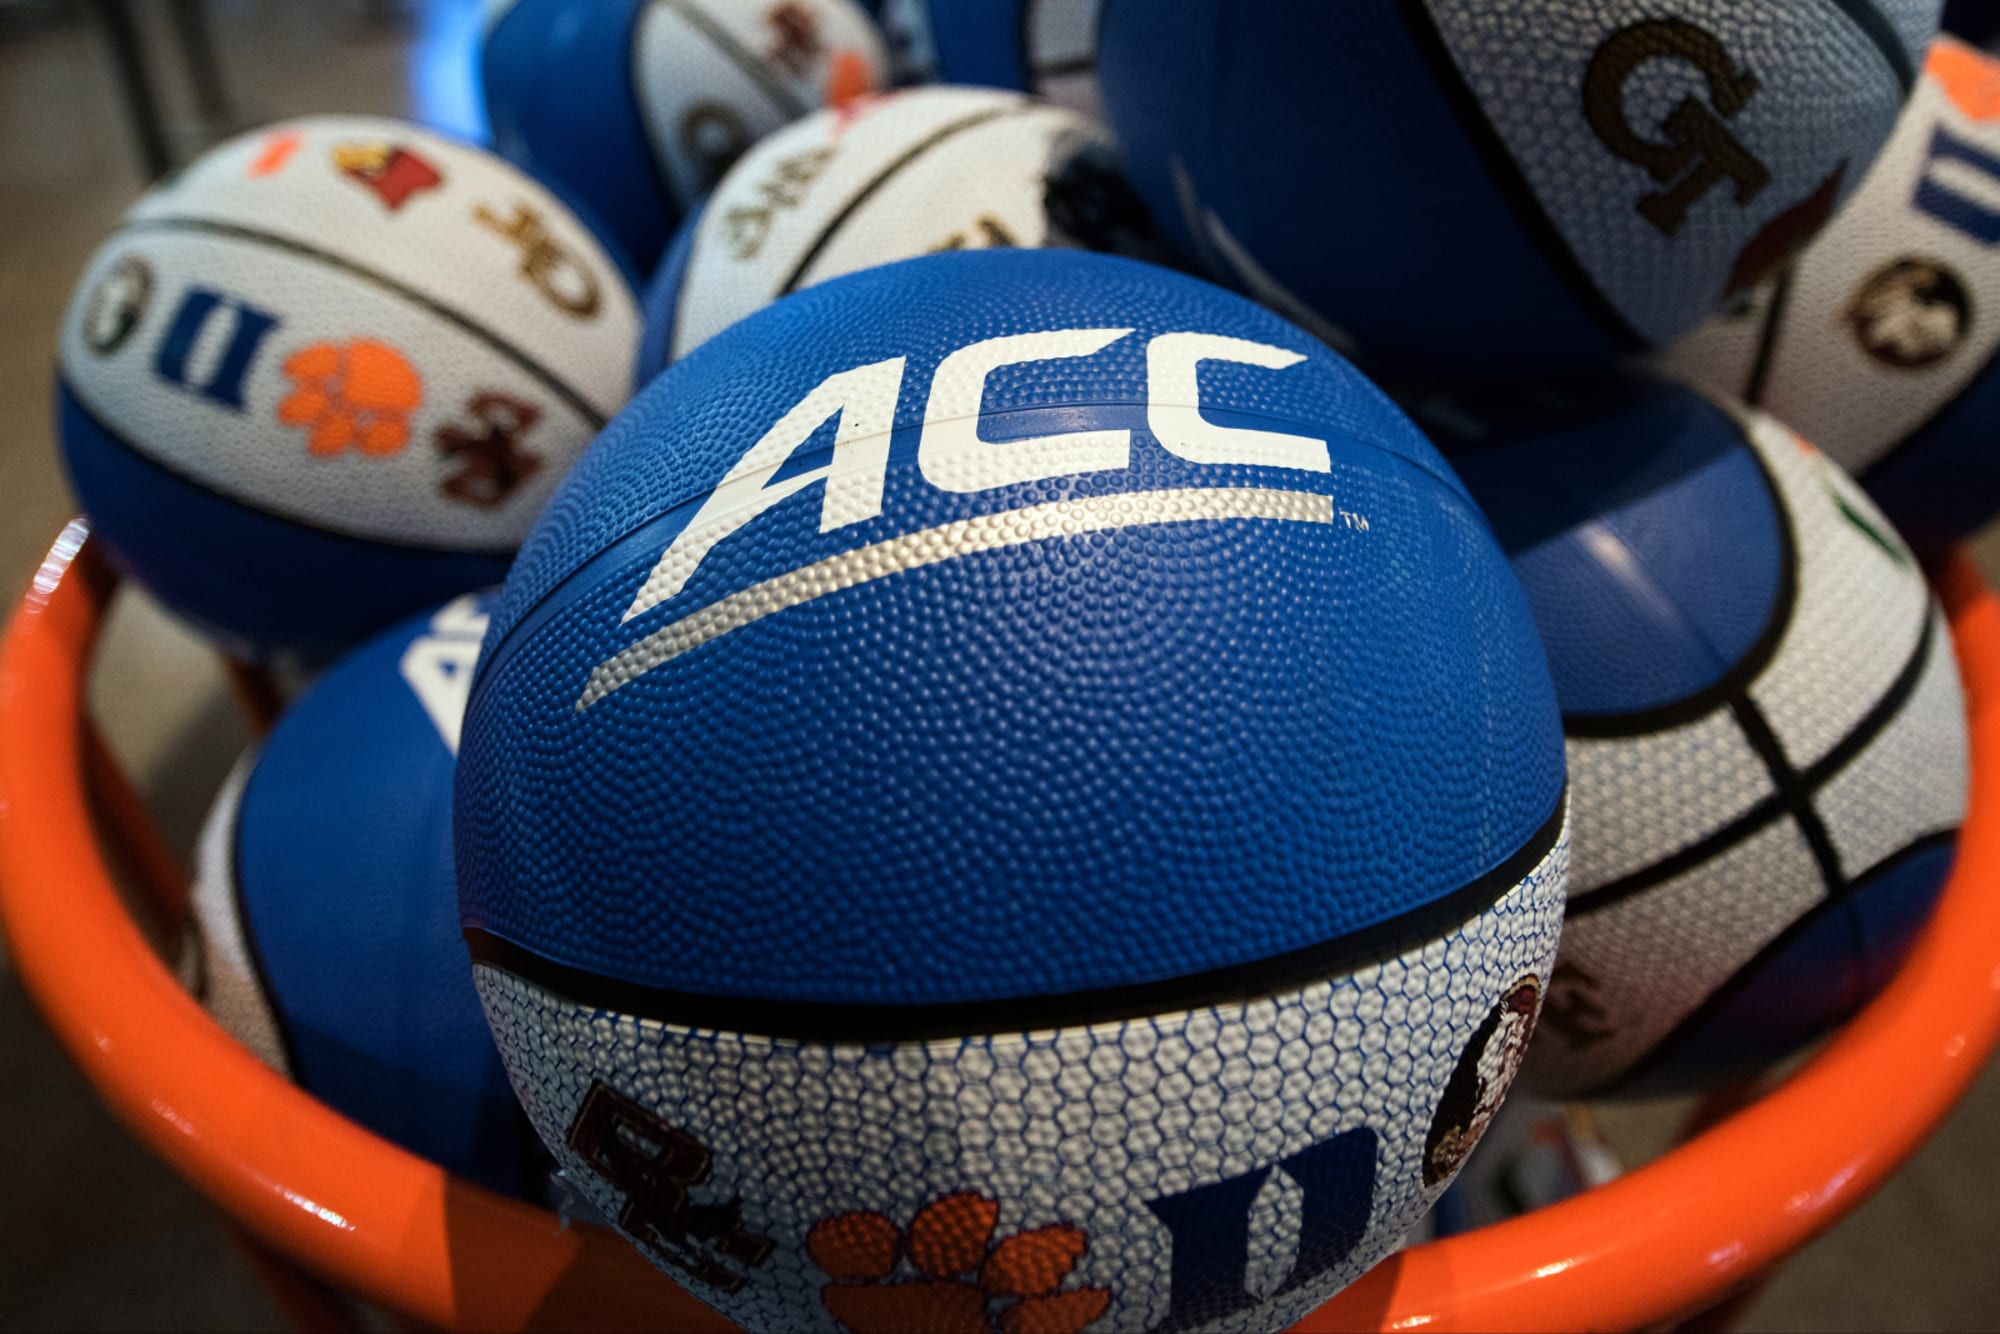 acc conference basketball teams